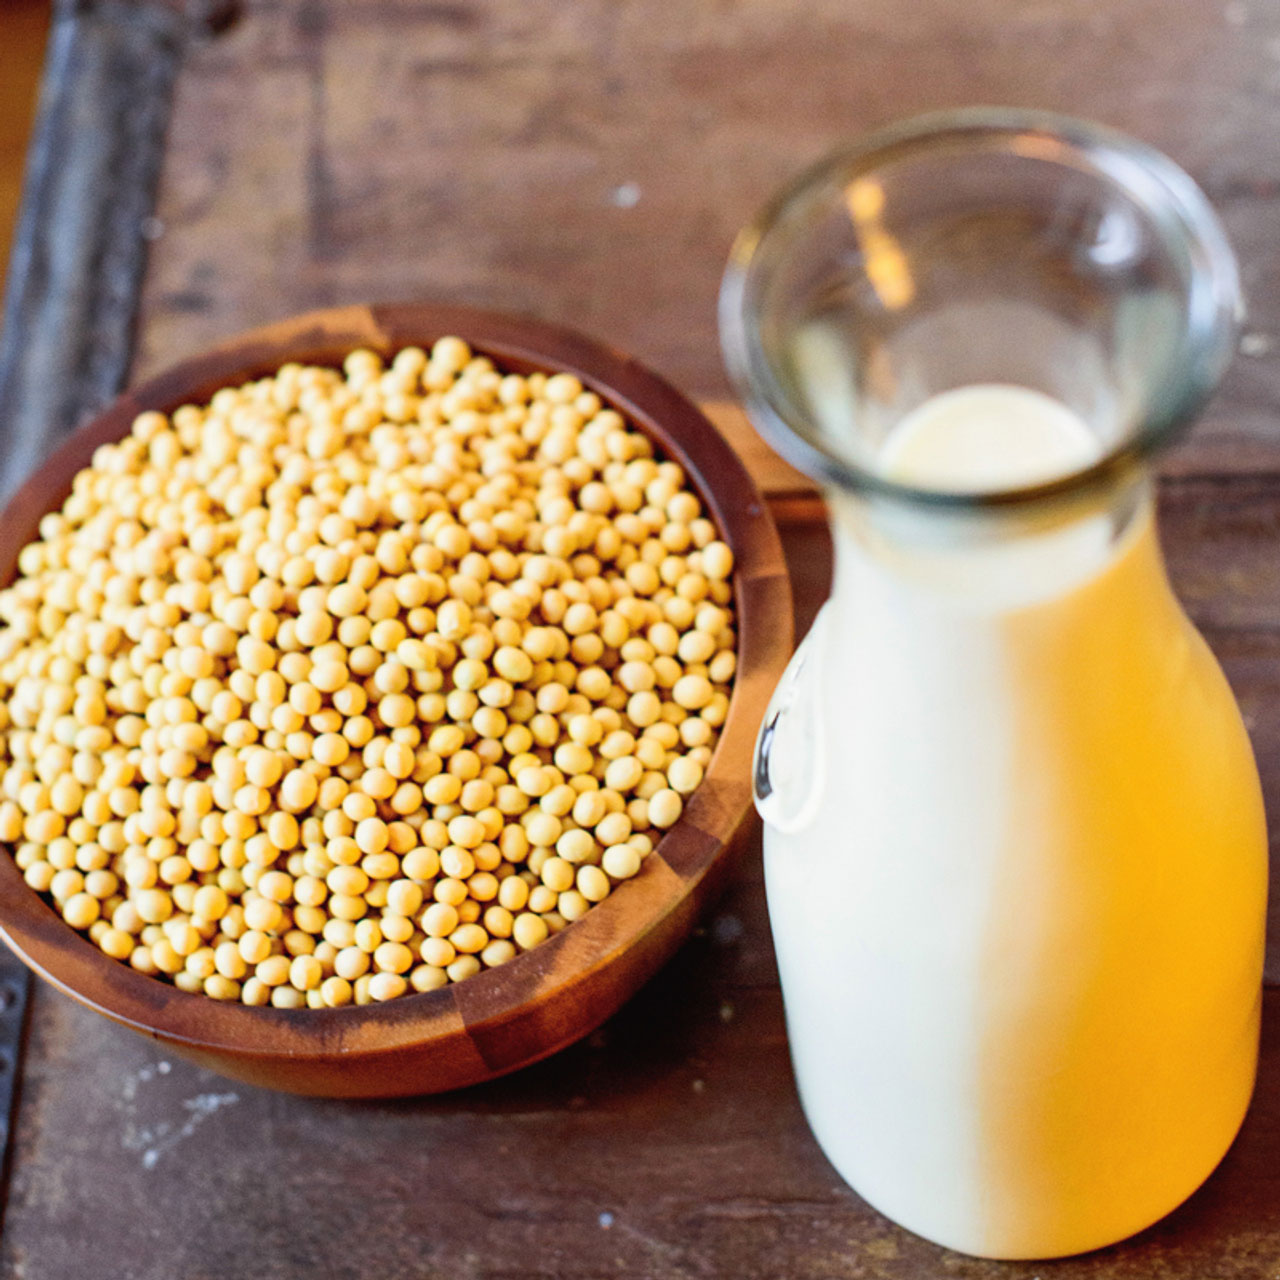 A wooden bowl filled with soybeans a tall glass container of soy milk.